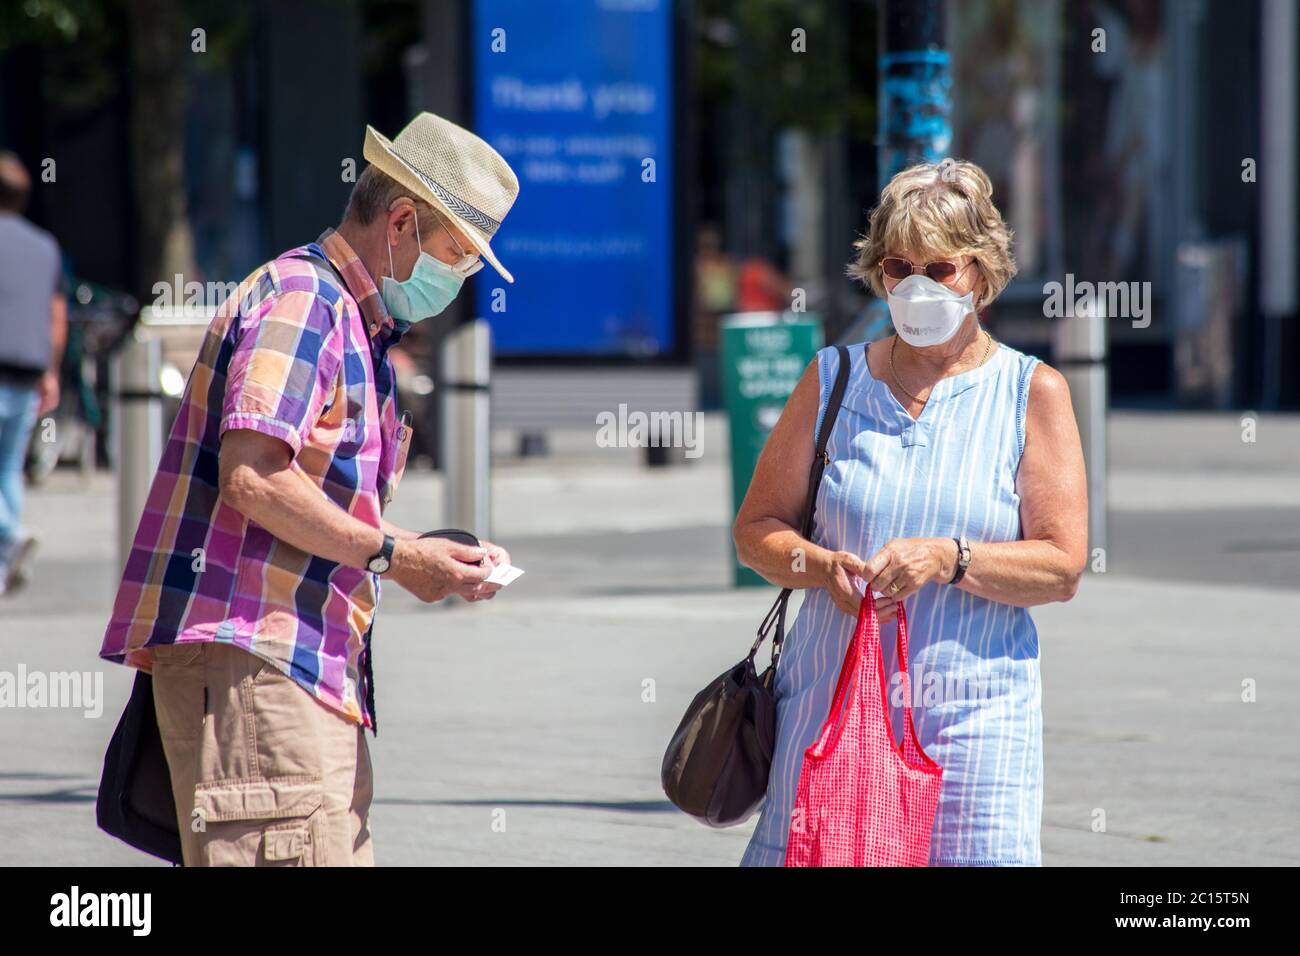 Older couple wearing face masks to protect from coronavirus in 2020, Southampton Stock Photo